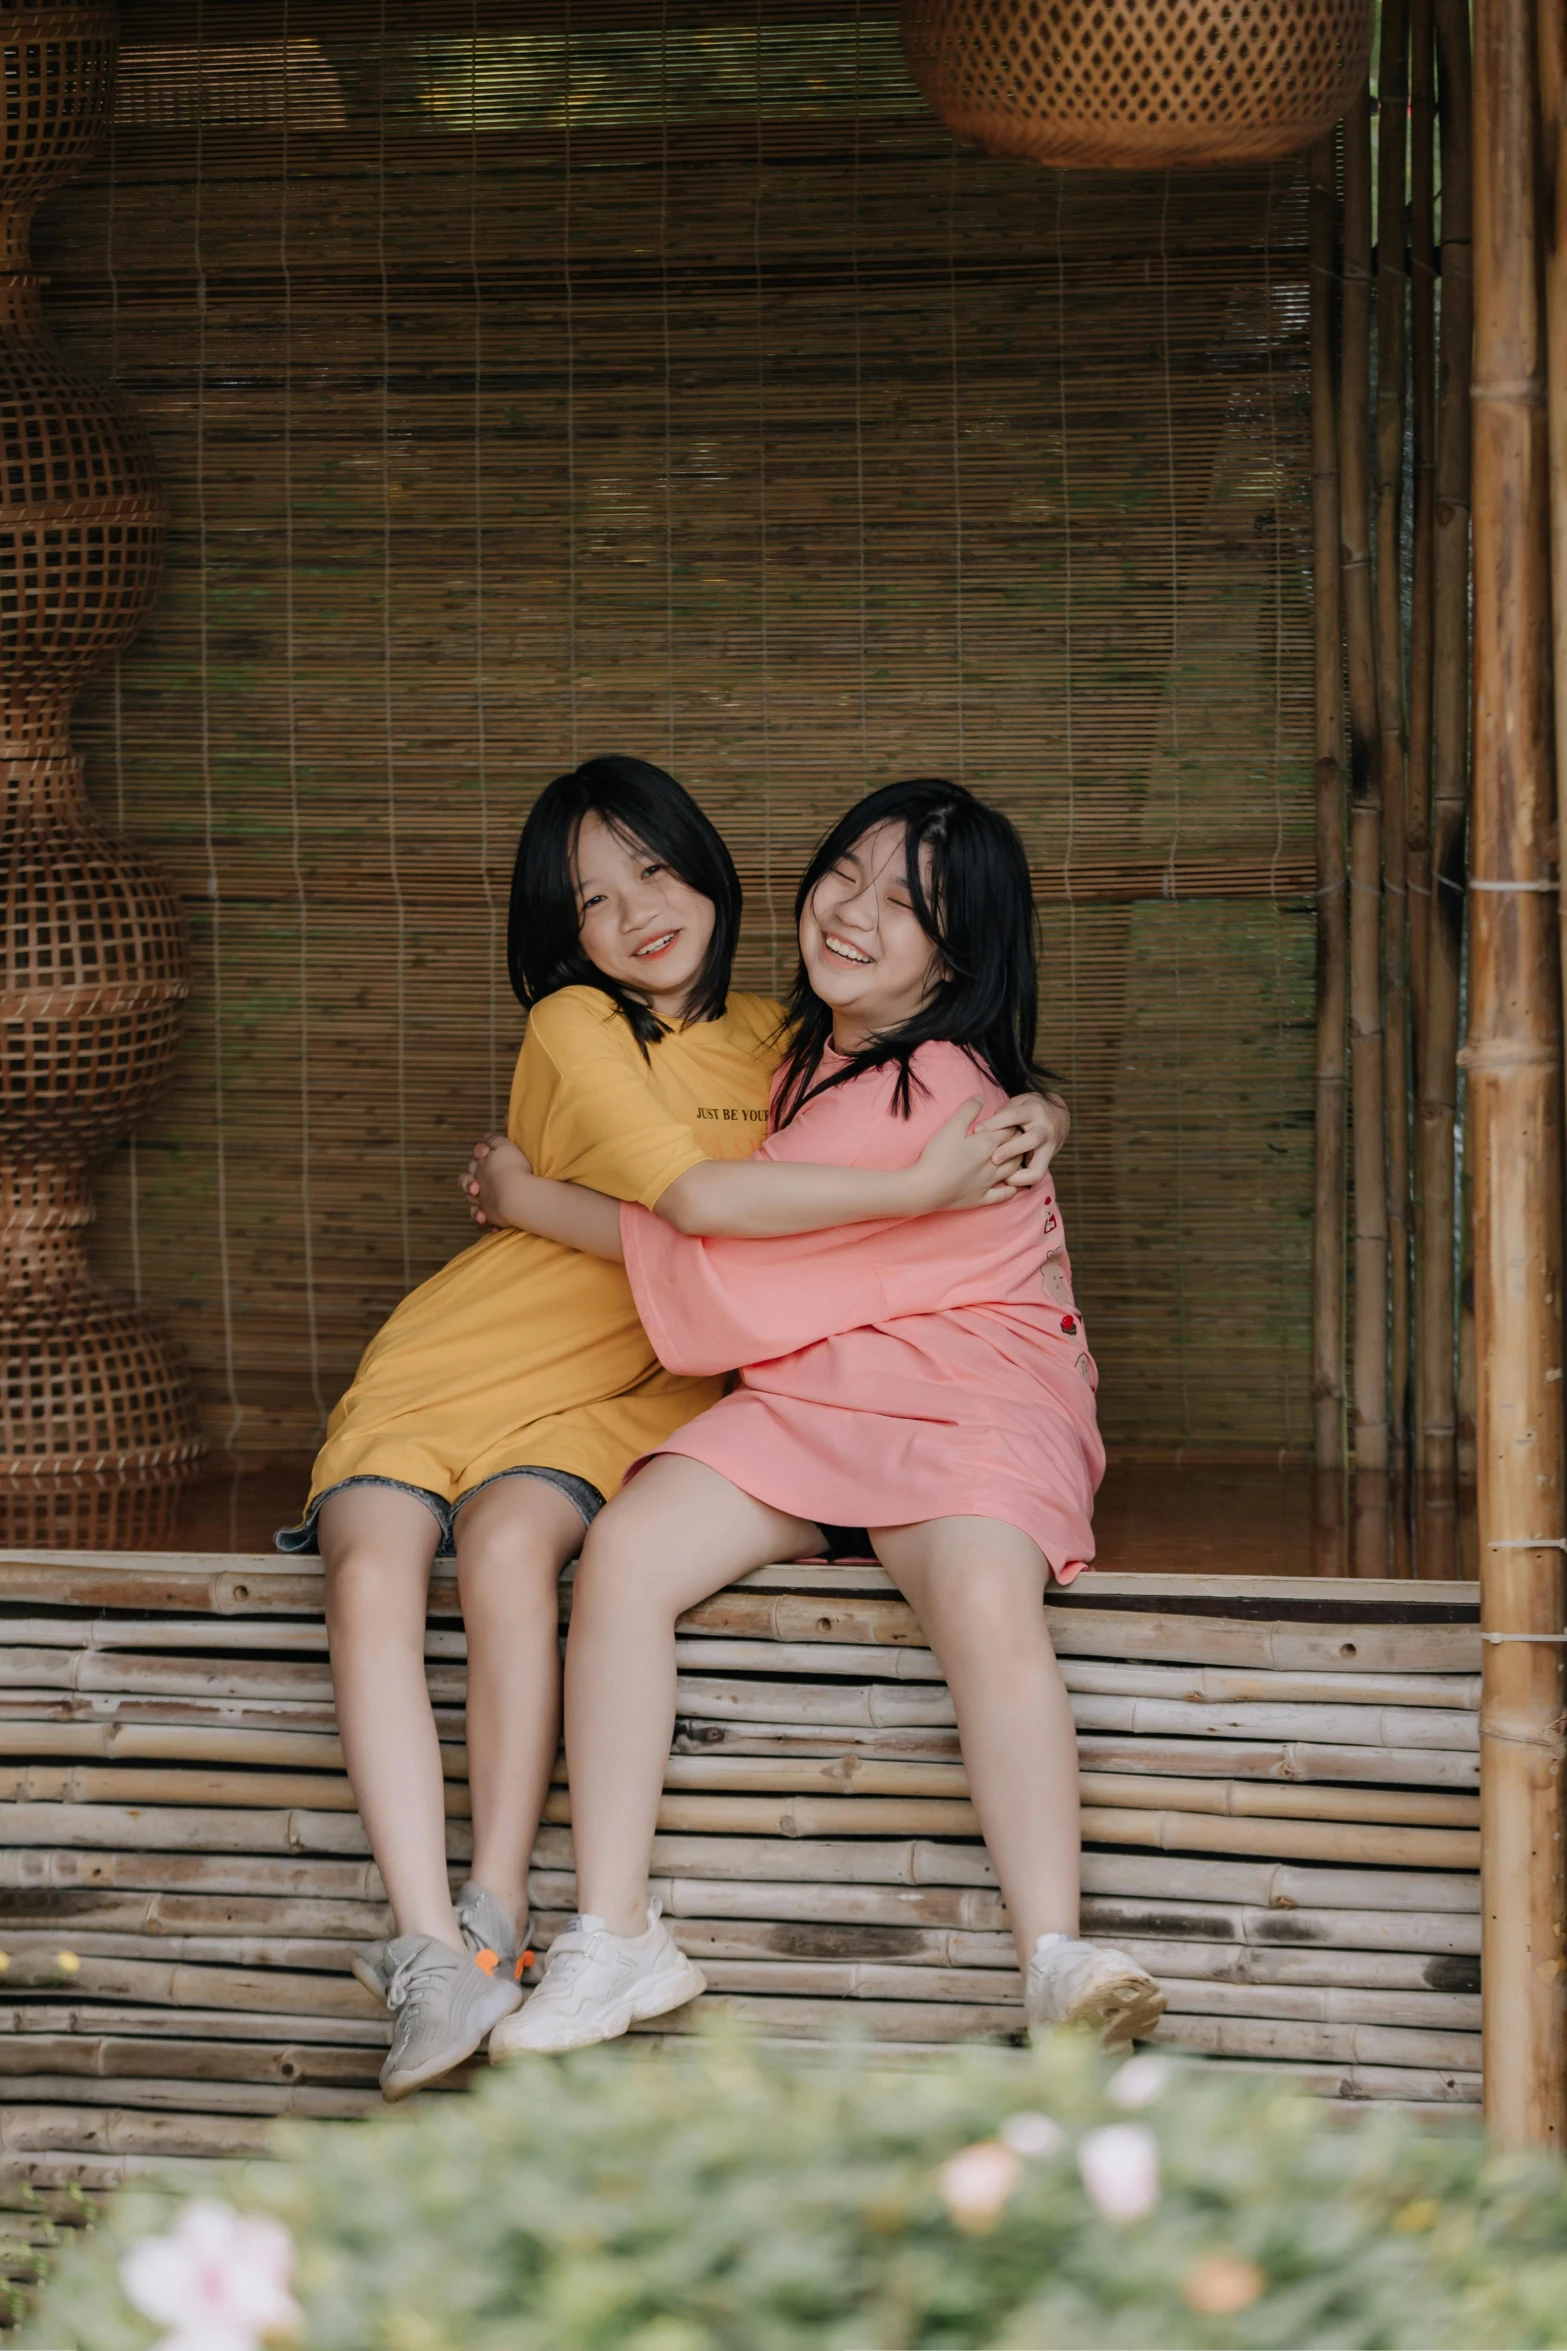 two women hugging on a wooden bench near the bamboo fence